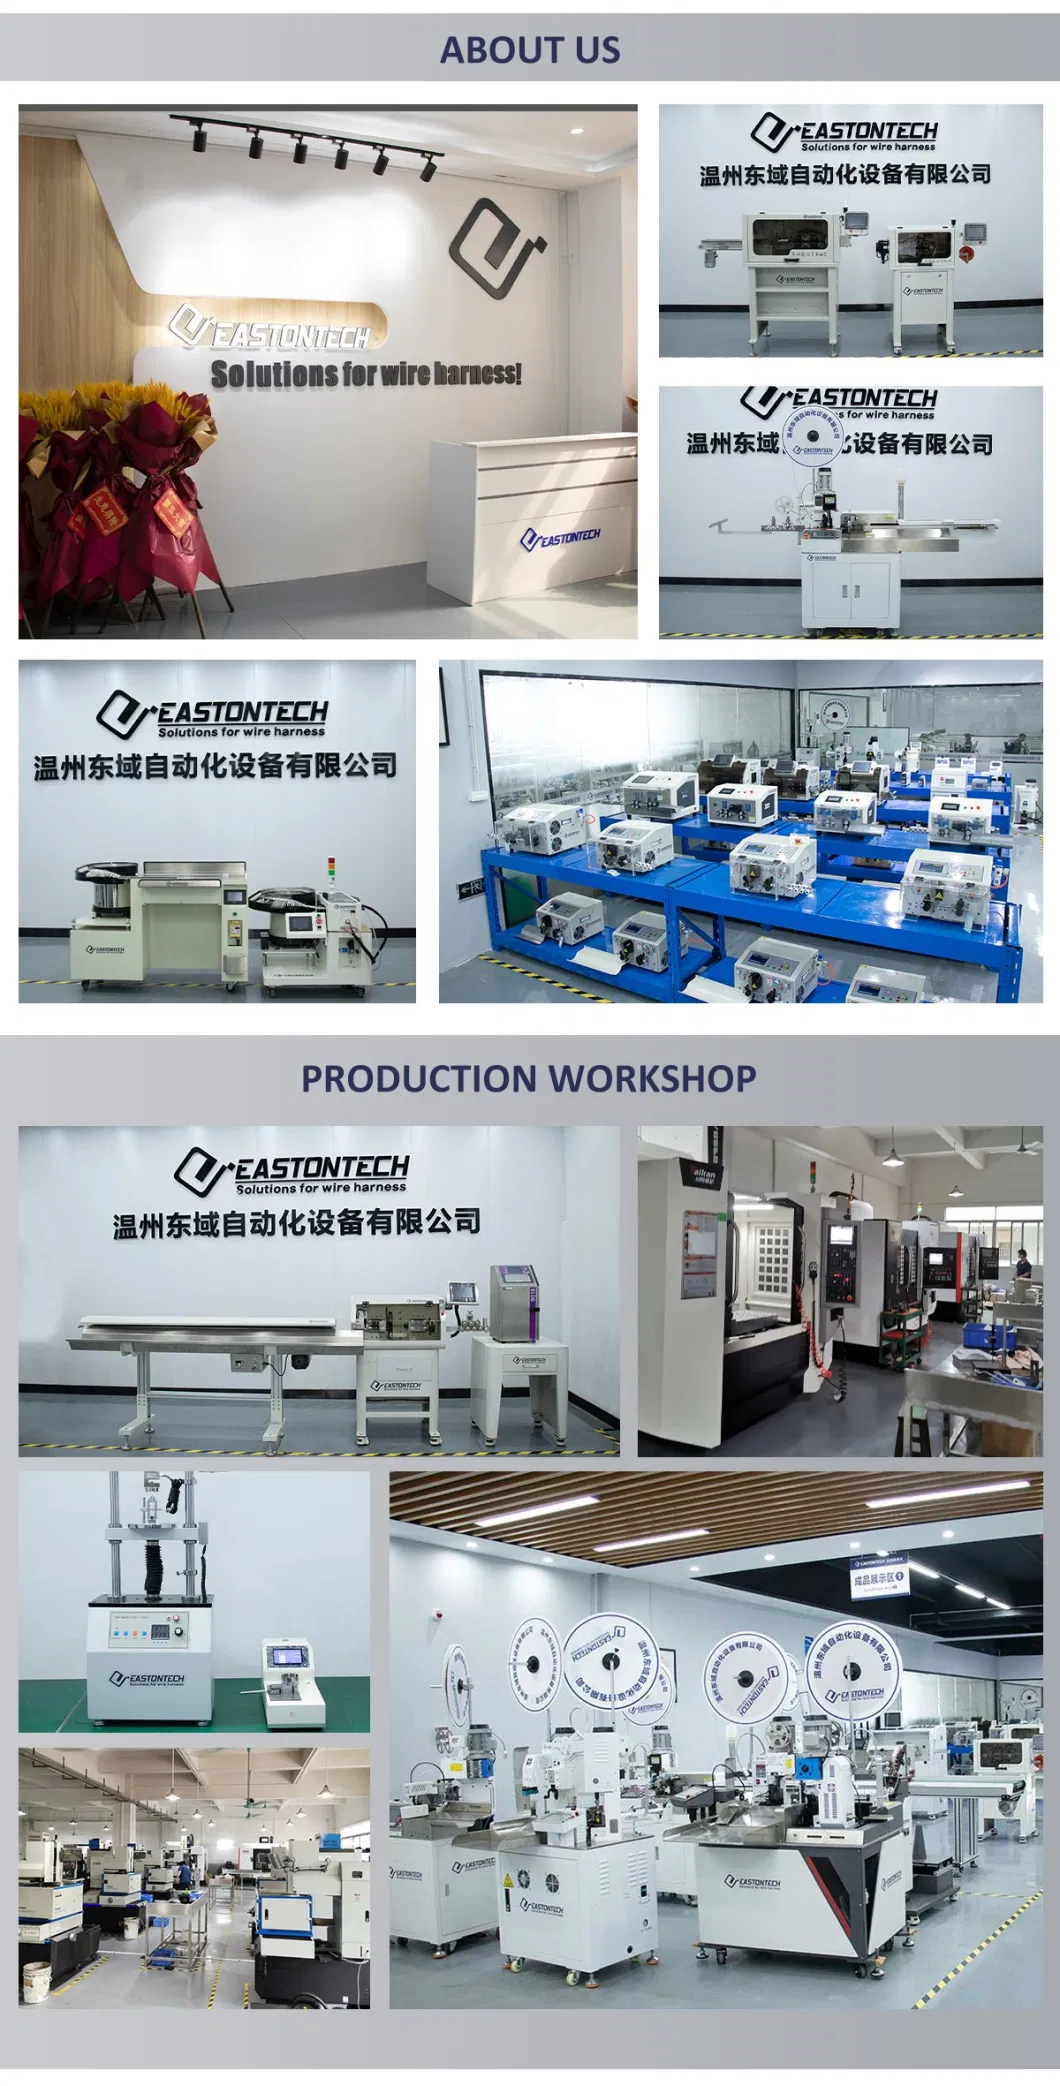 Eastontech Fully Automatic Electrical Multi-Conductor Cable Cutting and Stripping Machine 2/3/4 Cores Inner Wire Peeling Tools